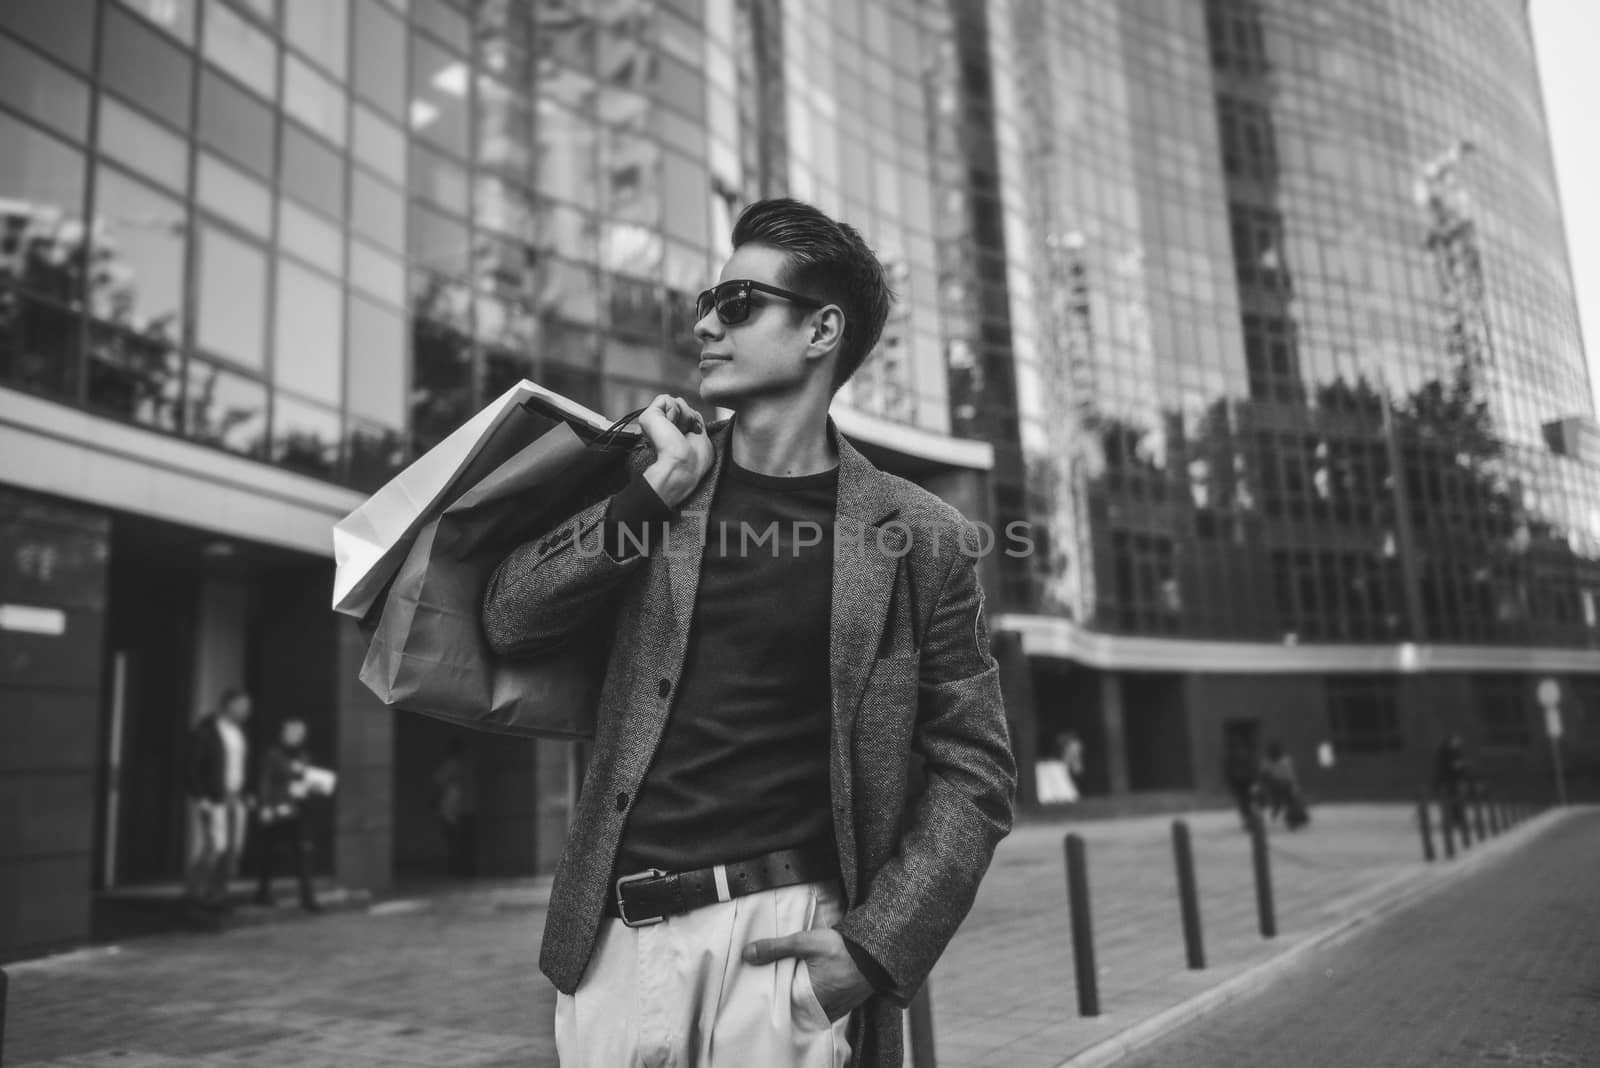 Serious stylish young man with sunglasses walking in urban street and enjoying Black Friday shopping in trendy stores in city by Nickstock